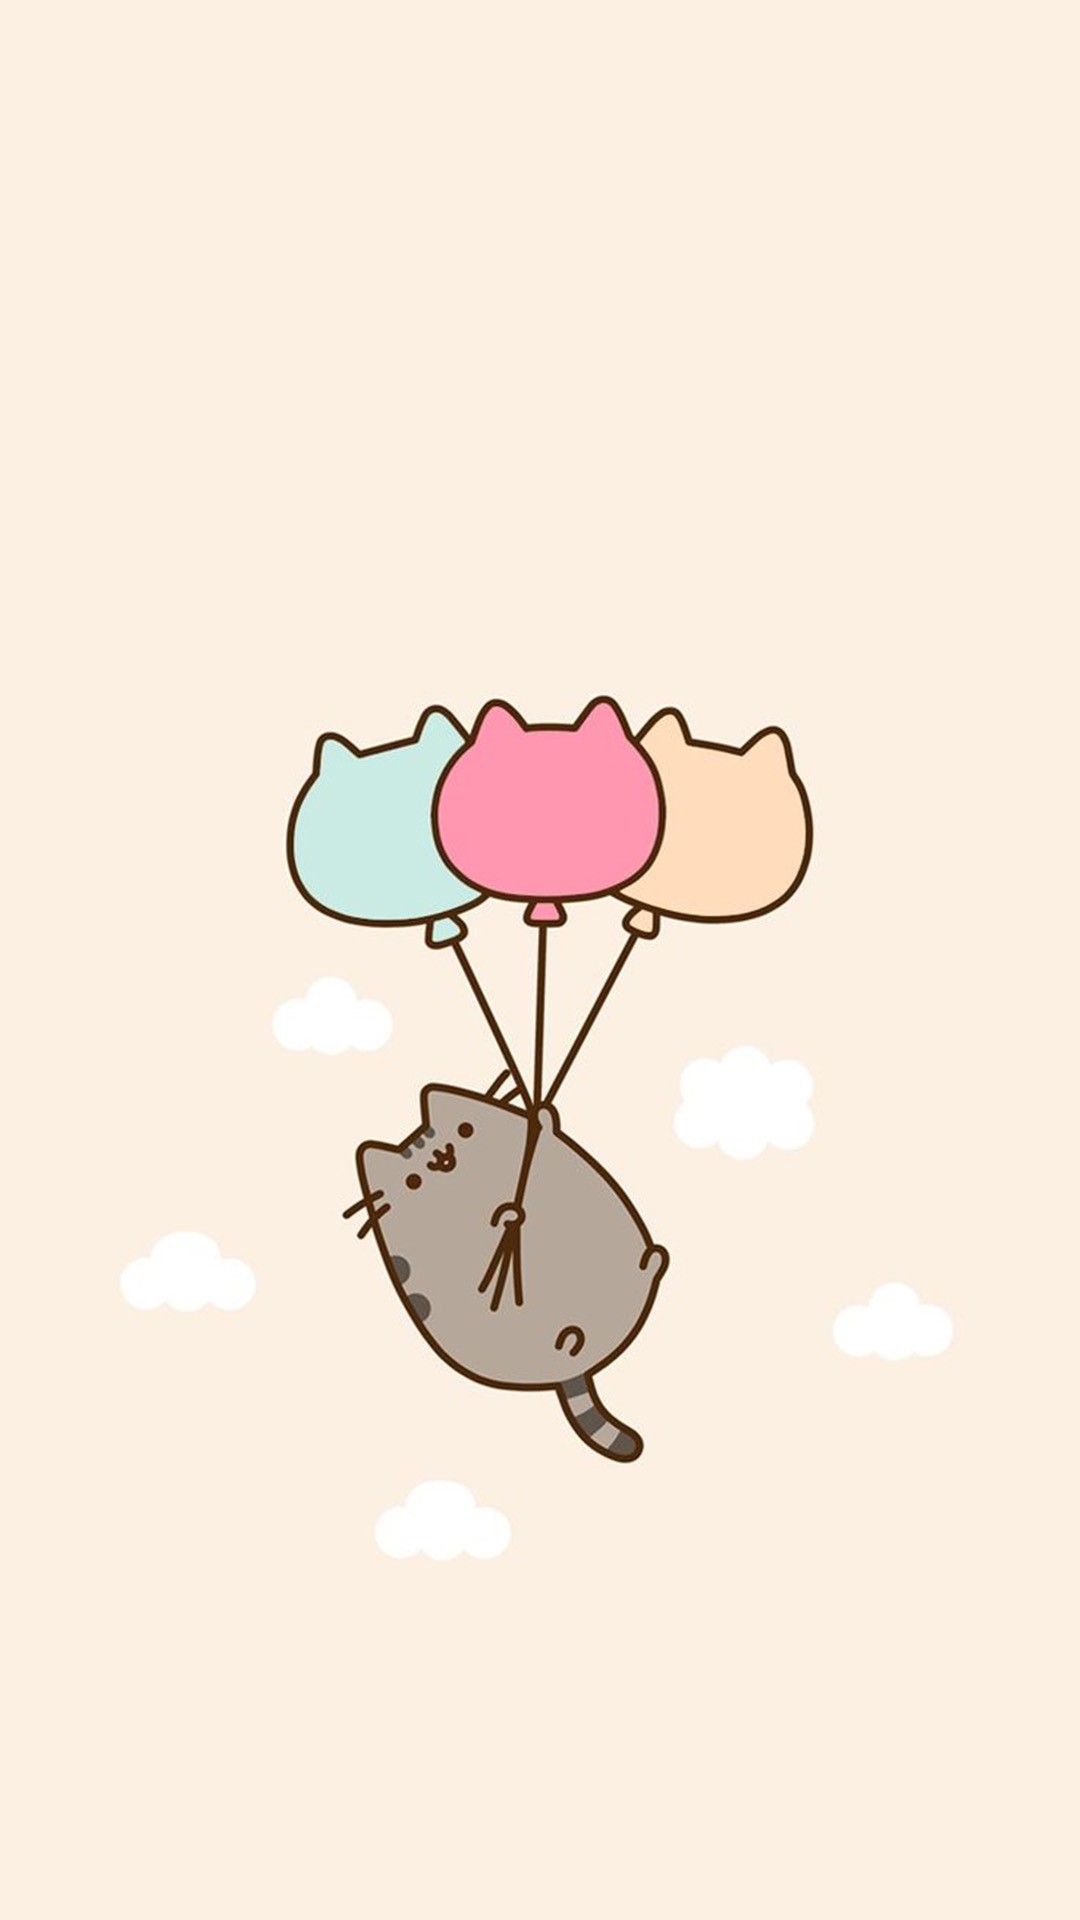 Pusheen the cat ballons / We Heart It on imgfave